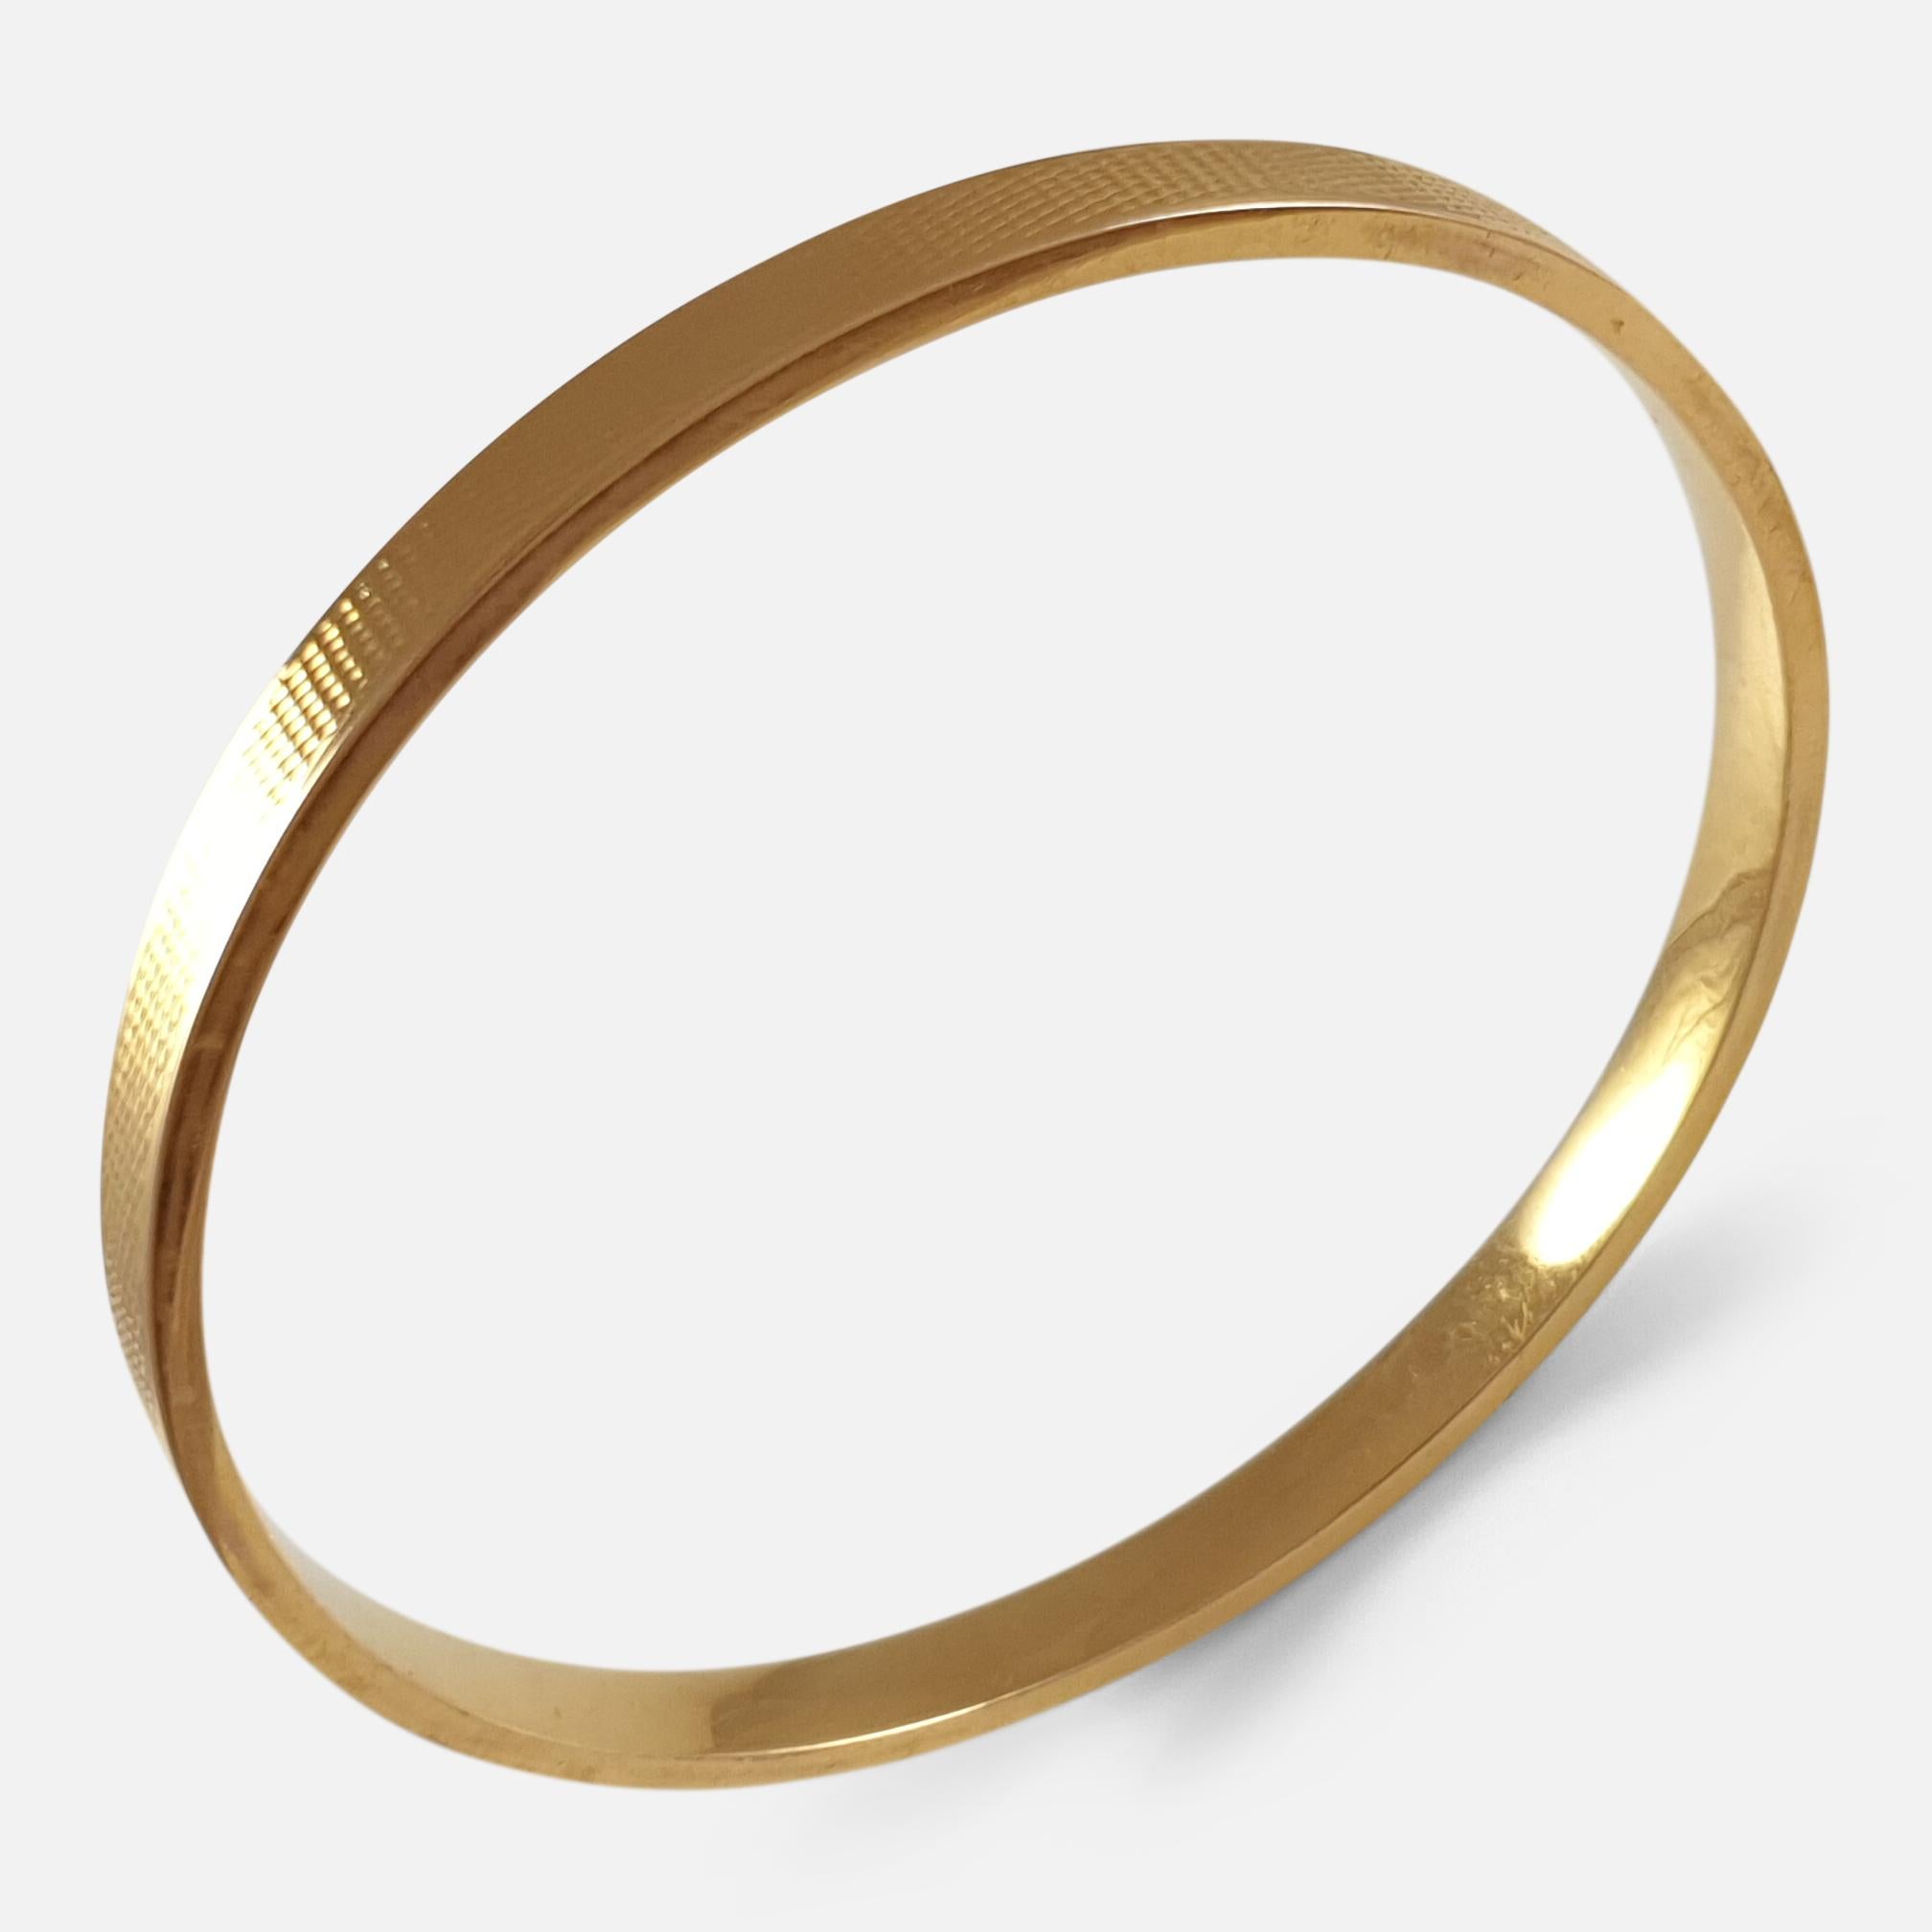 An Art Deco engine turned 15 karat yellow gold hollow Flapper bangle. The bangle is UK hallmarked, stamped '15.625' to denote 15 karat (carat) gold, and London 1927.

Engraving: - None.

Measurement: - The internal diameter is 7.65cm. The internal